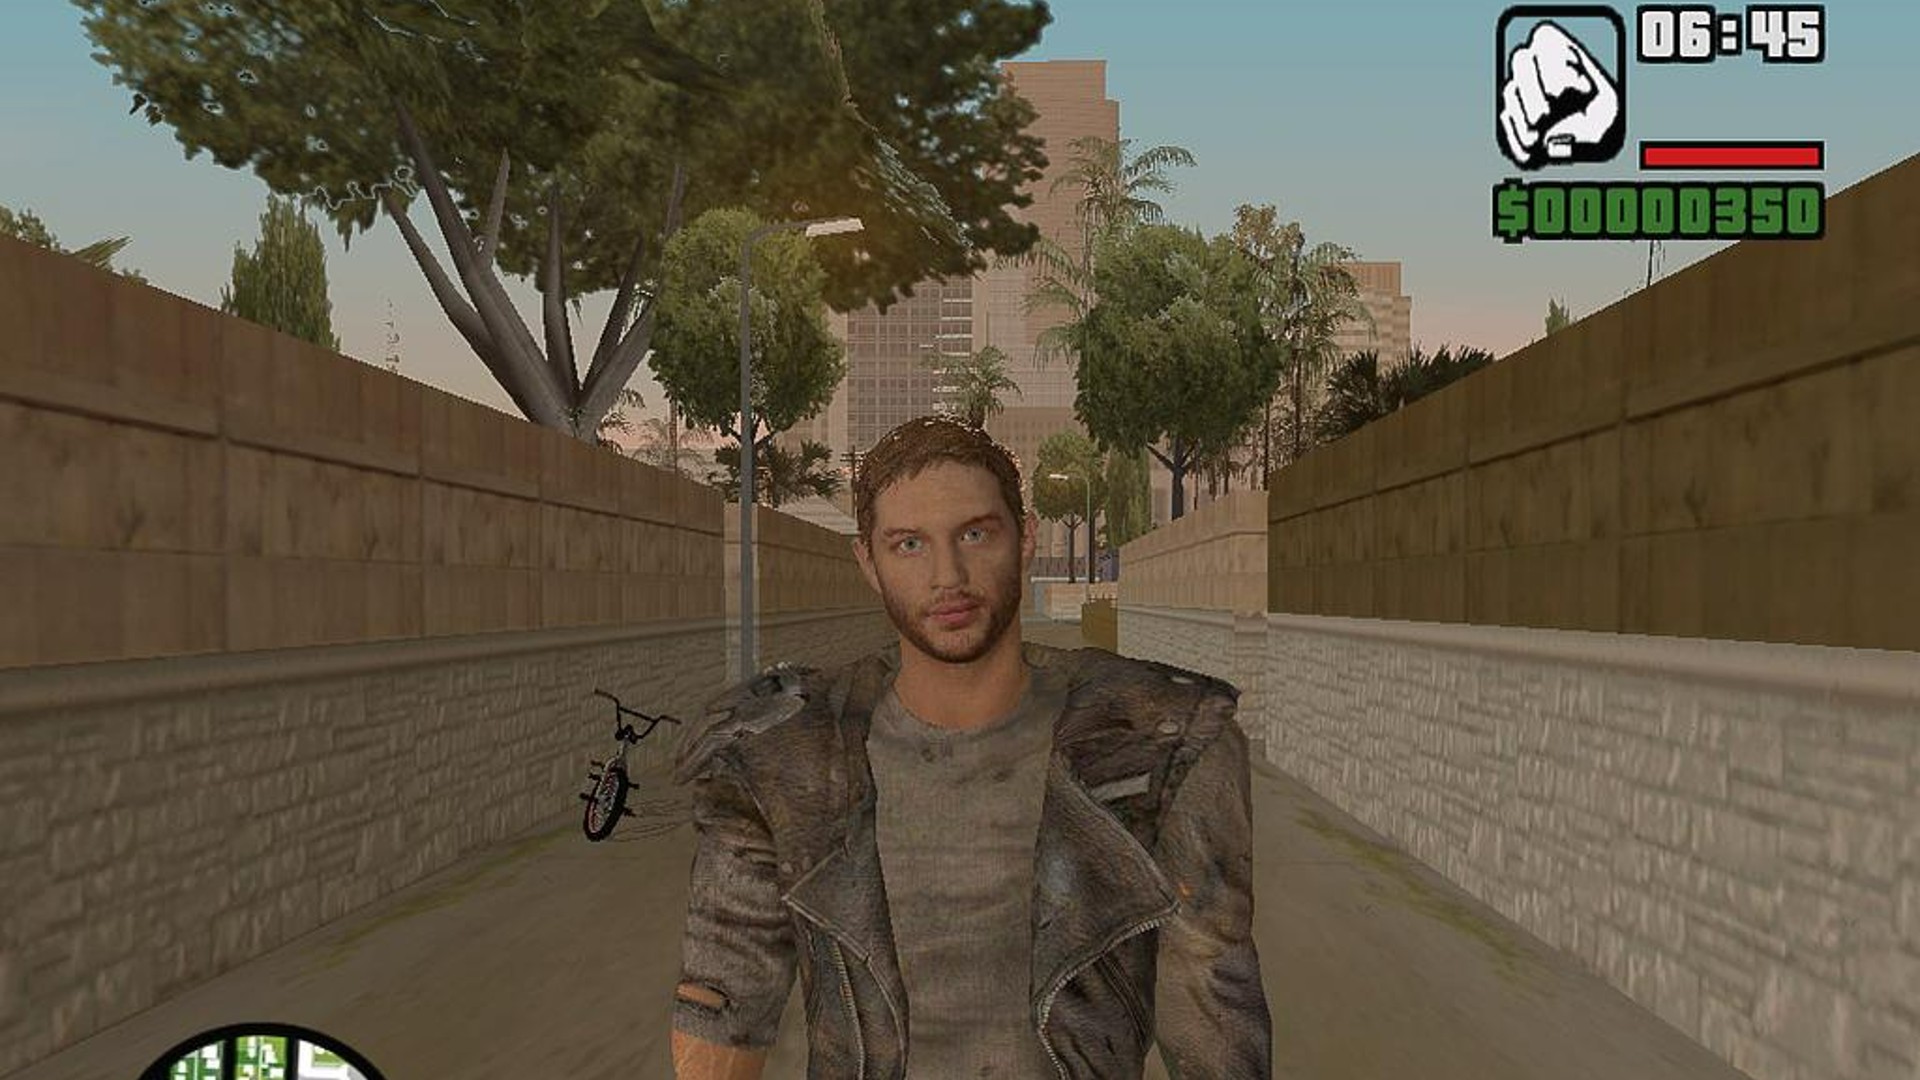 Meet the GTA modder who's spent 18 years turning San Andreas into Mad Max 2